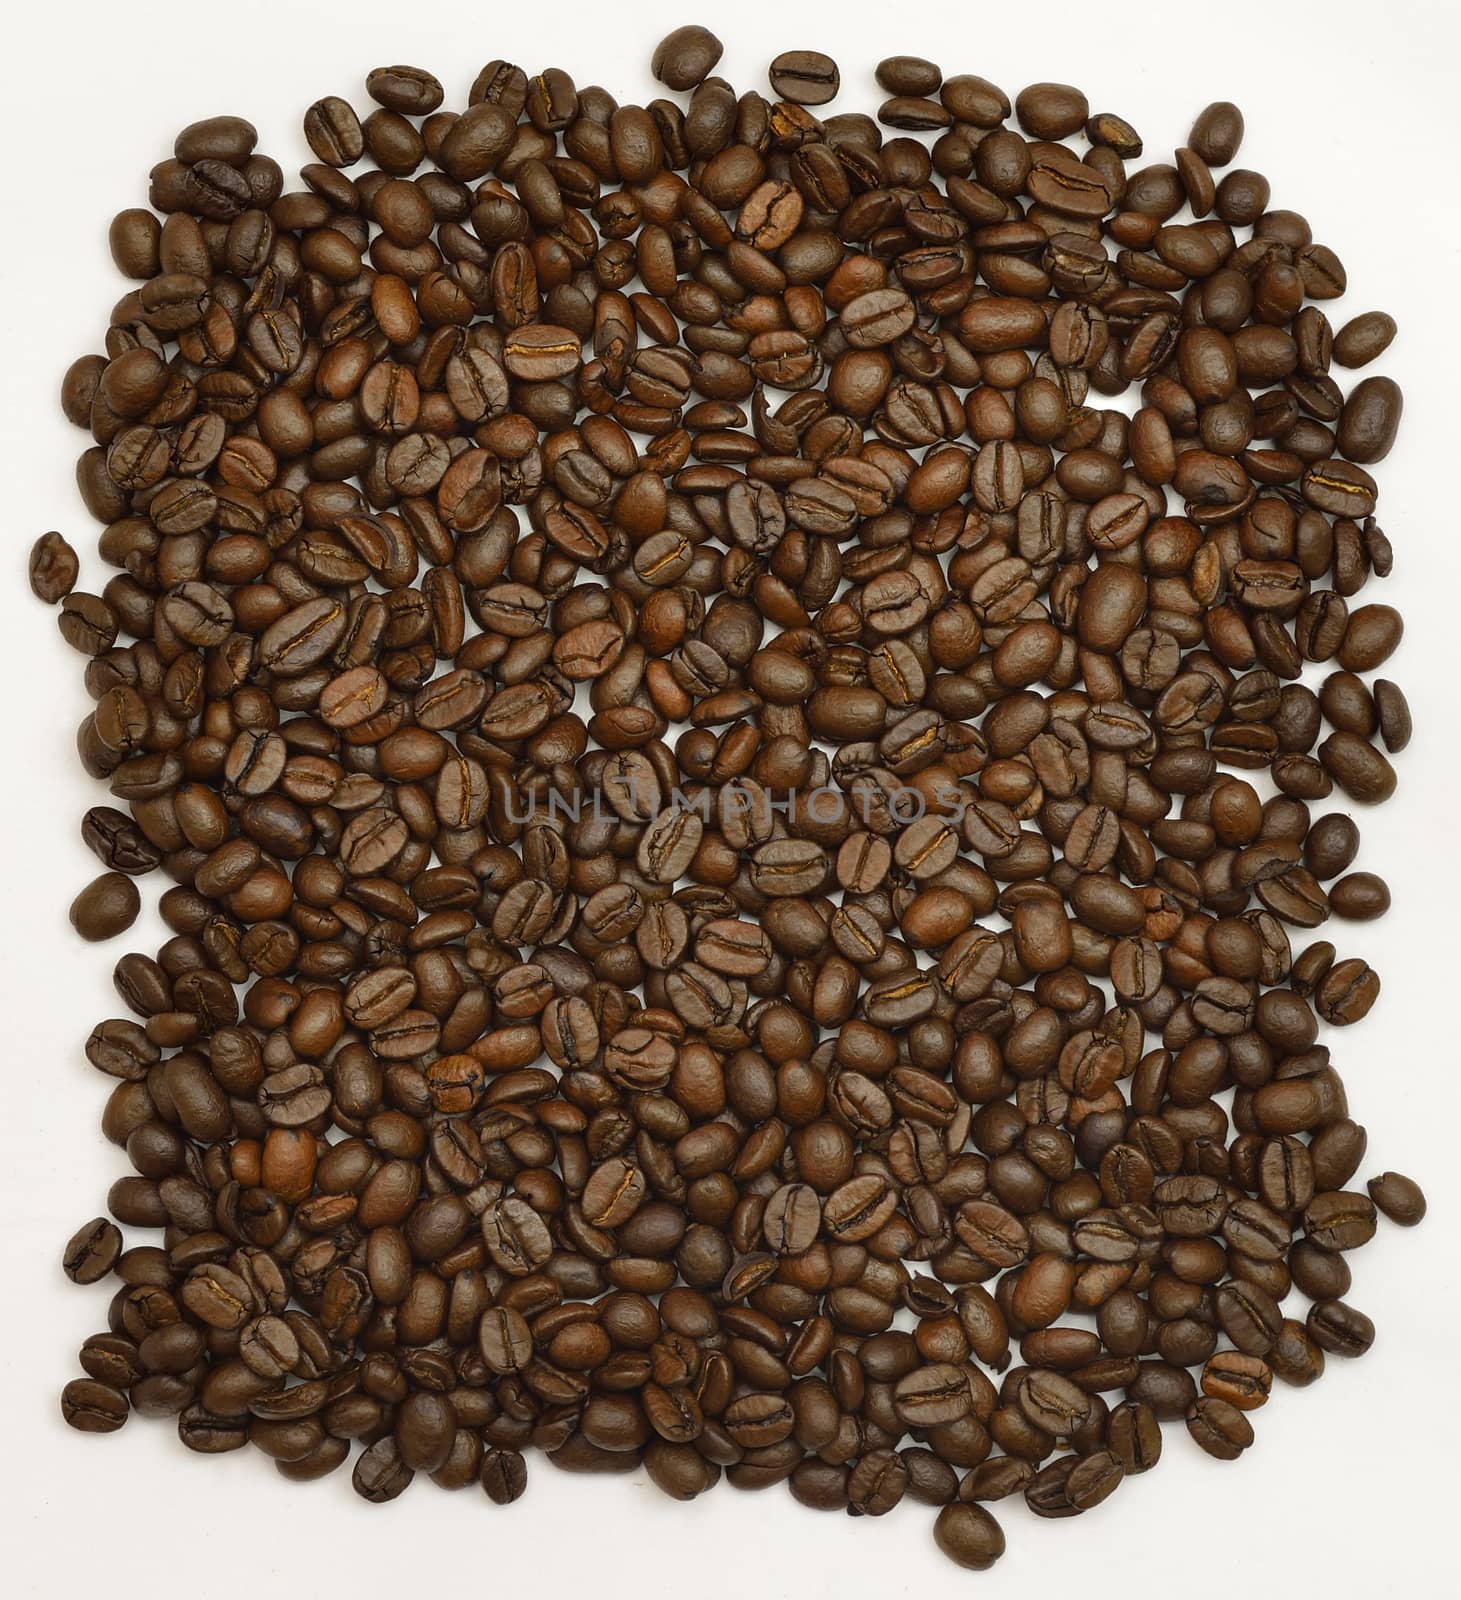 Brown coffee beans by cherezoff